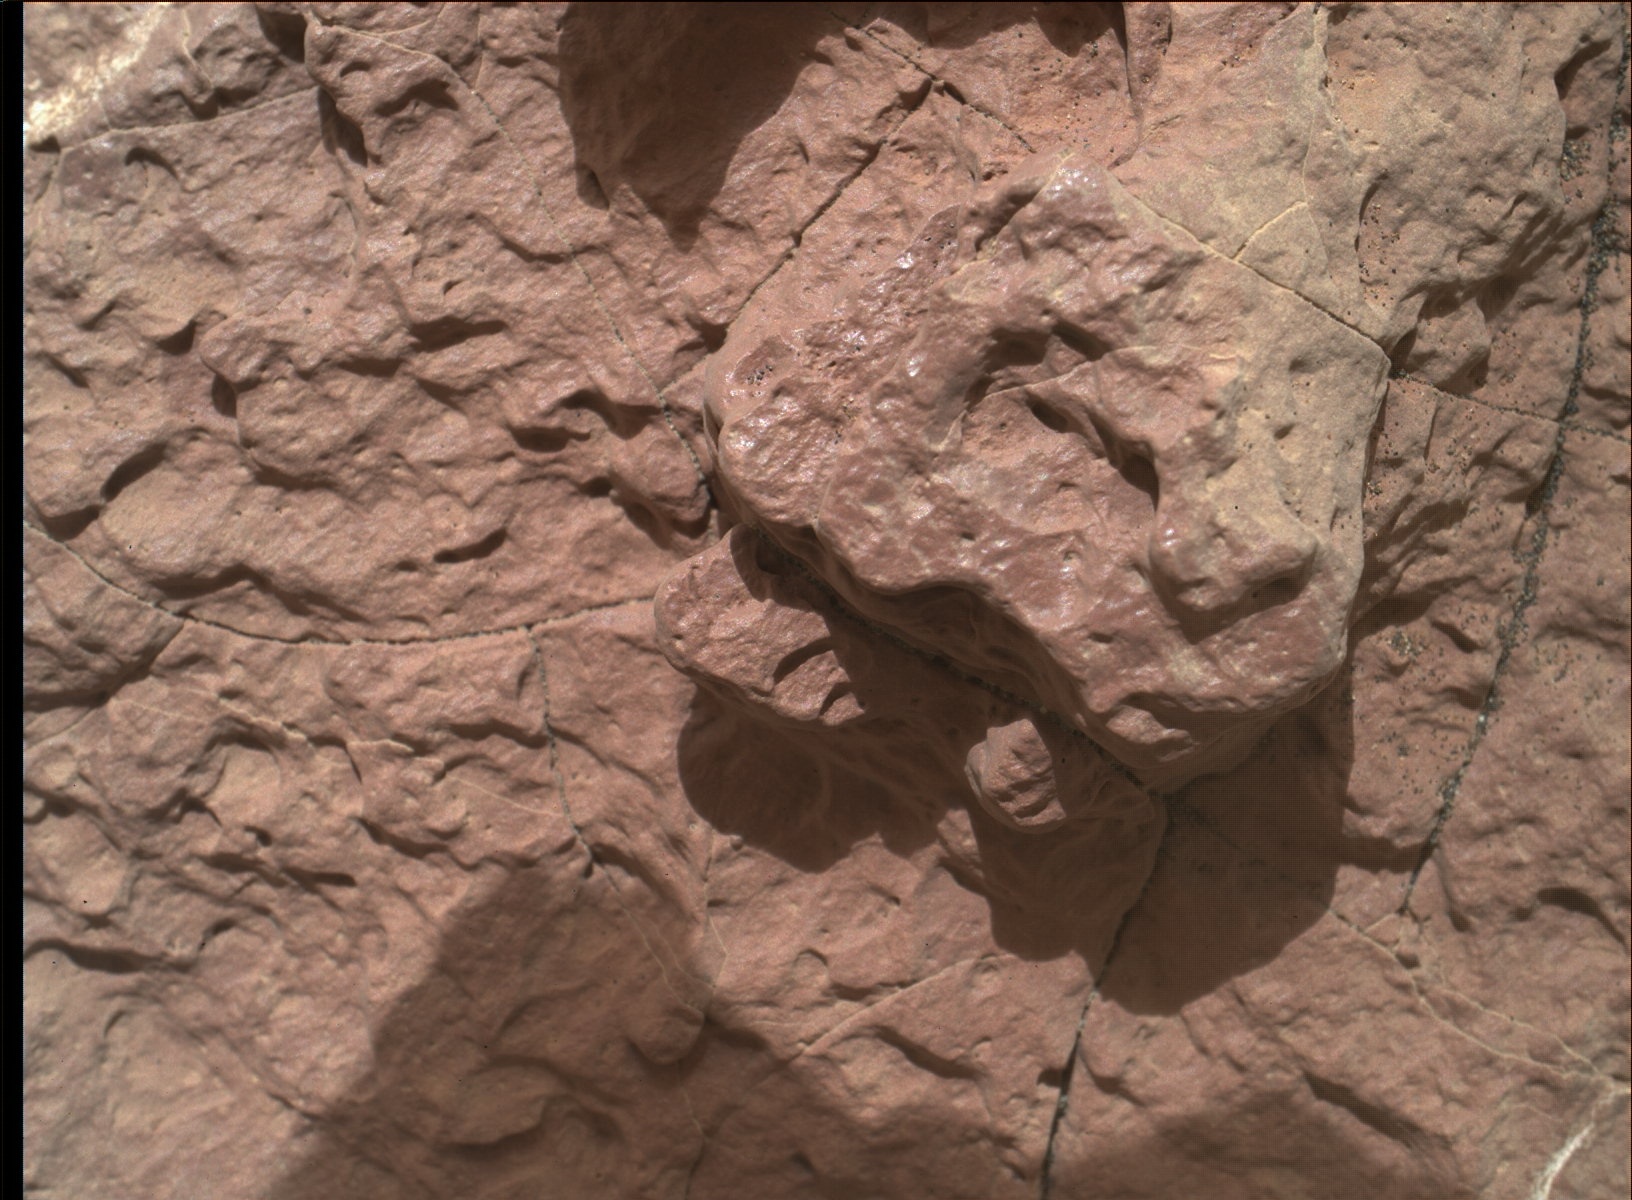 Nasa's Mars rover Curiosity acquired this image using its Mars Hand Lens Imager (MAHLI) on Sol 1576